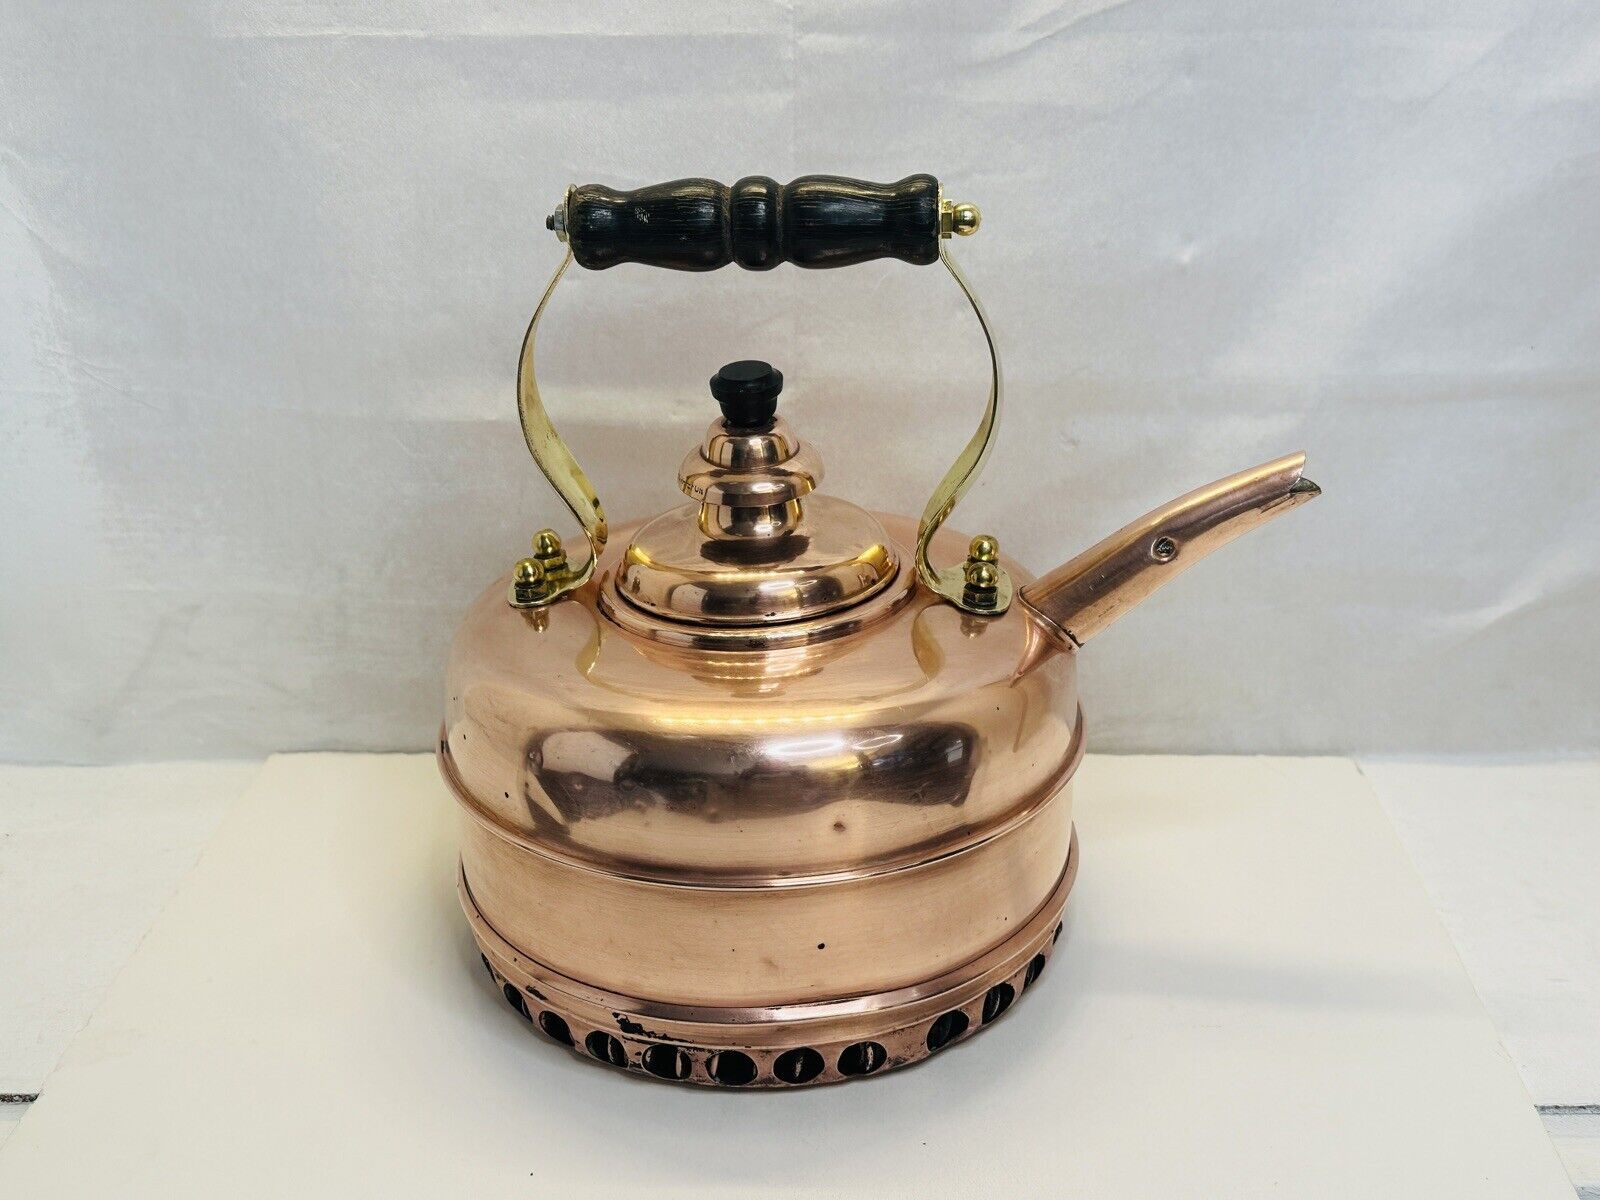 Vintage Simplex England Solid Copper Whistling Tea Kettle With Coil REGd 786743